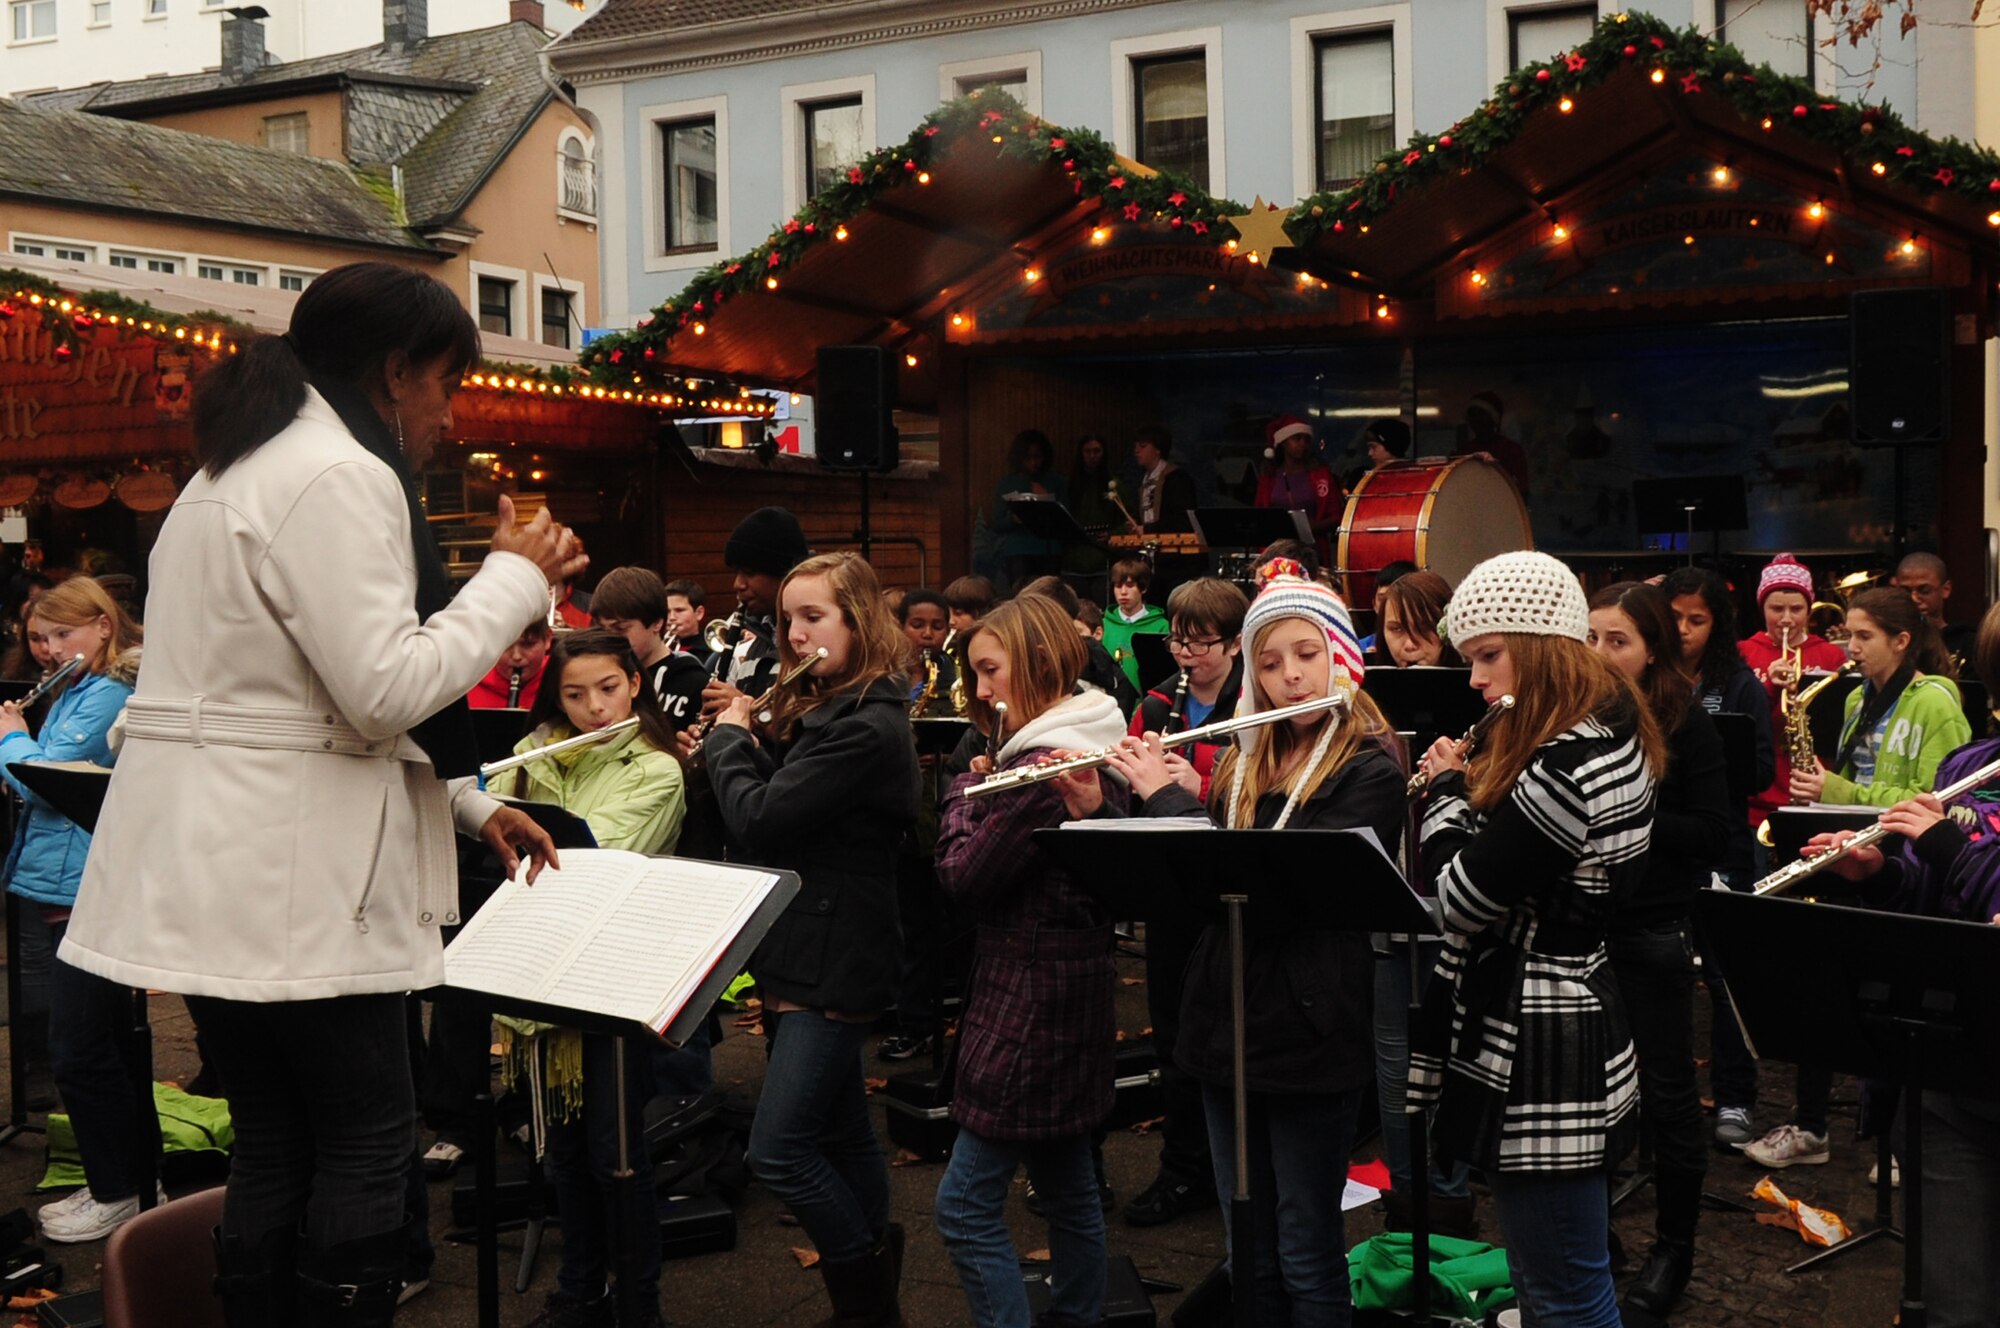 The Ramstein Middle School intermediate and advance band performs for the German and American community during the Christmas market in Kaiserslautern, Germany, Dec. 1, 2011. The market will be set up until Dec. 23 near Stiftskirche str. and on Schillerplatz str. (U.S. Air Force photo by Senior Airman Aaron-Forrest Wainwright) 
